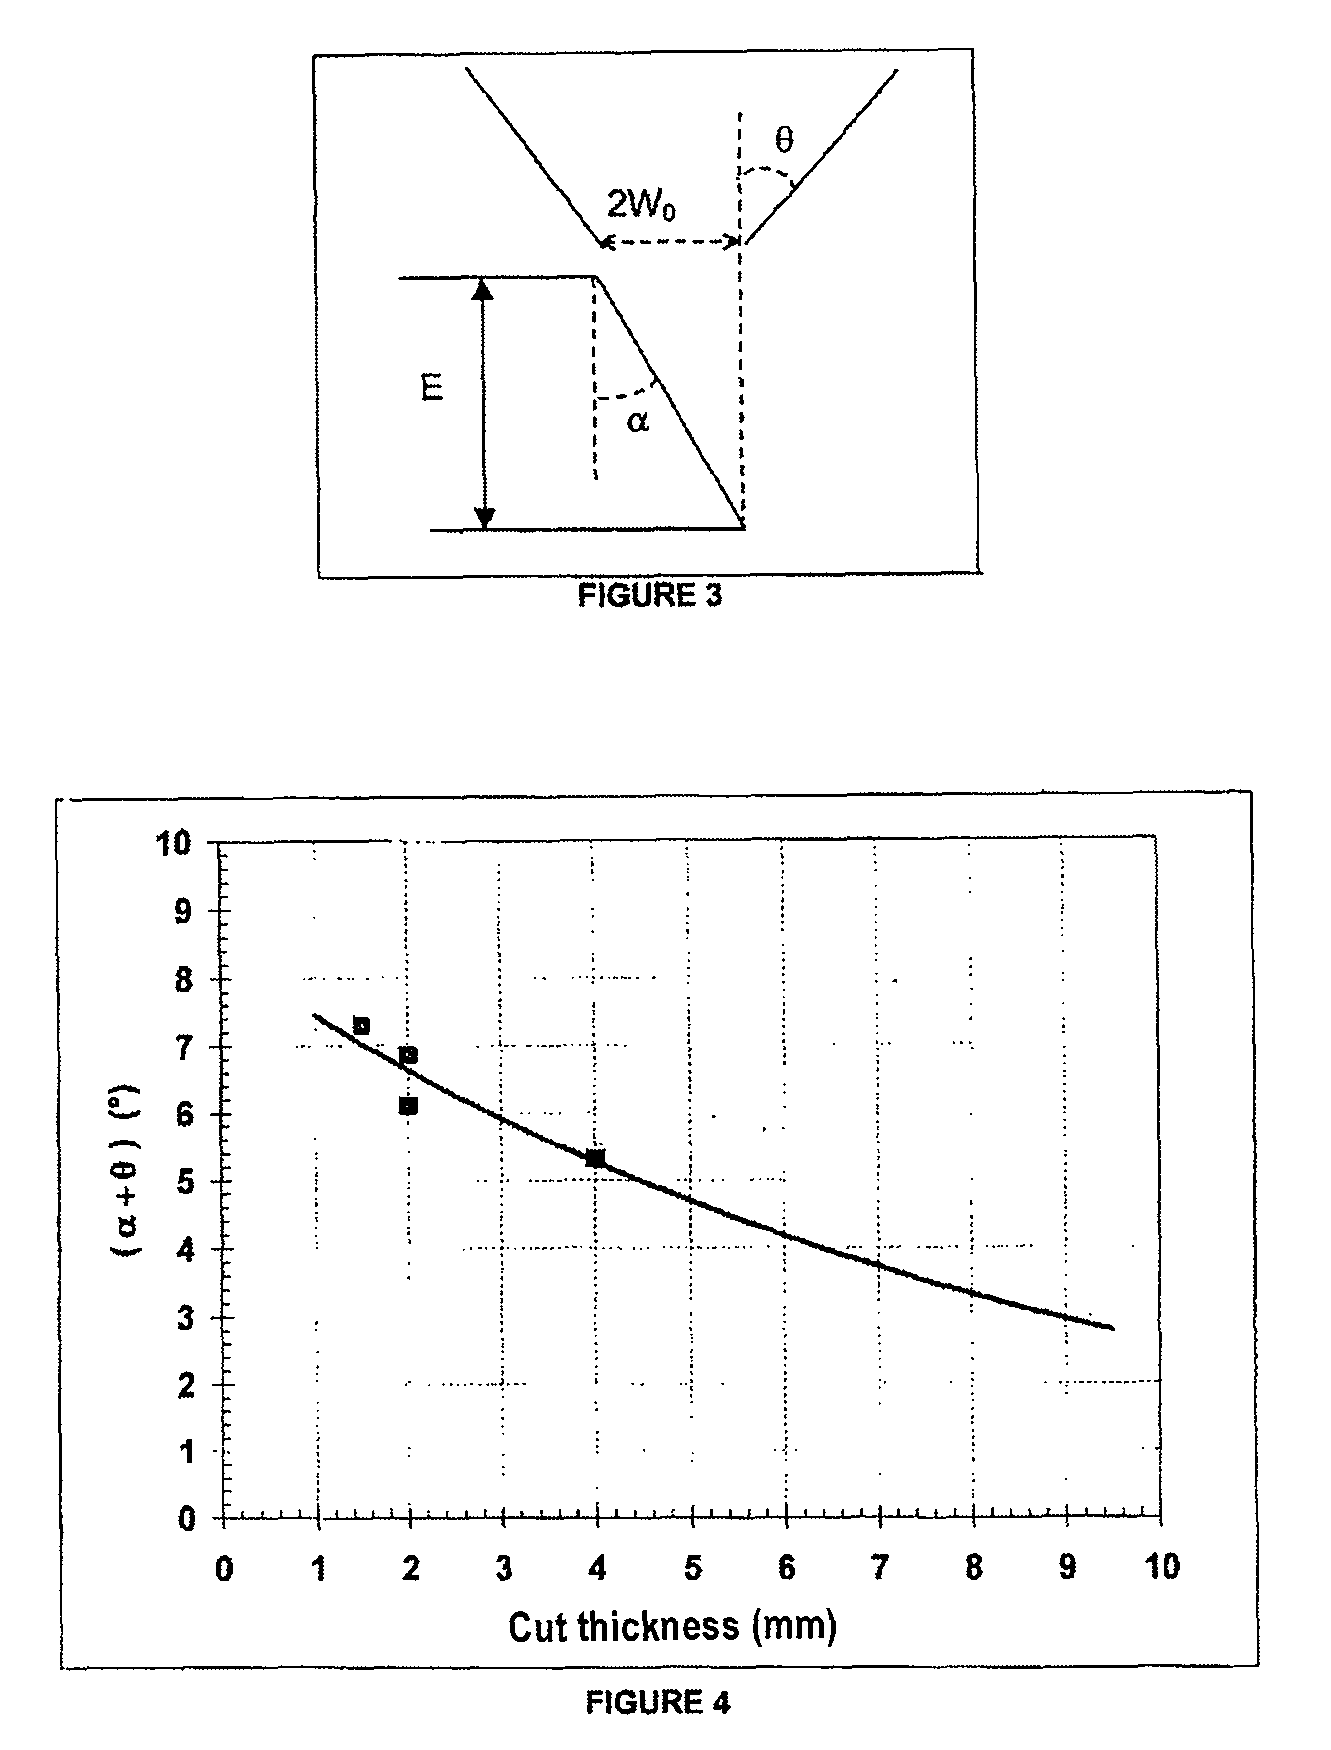 Cutting method using a laser having at least one ytterbium-based fiber, in which at least the power of the laser source, the diameter of the focused beam and the beam quality factor are controlled